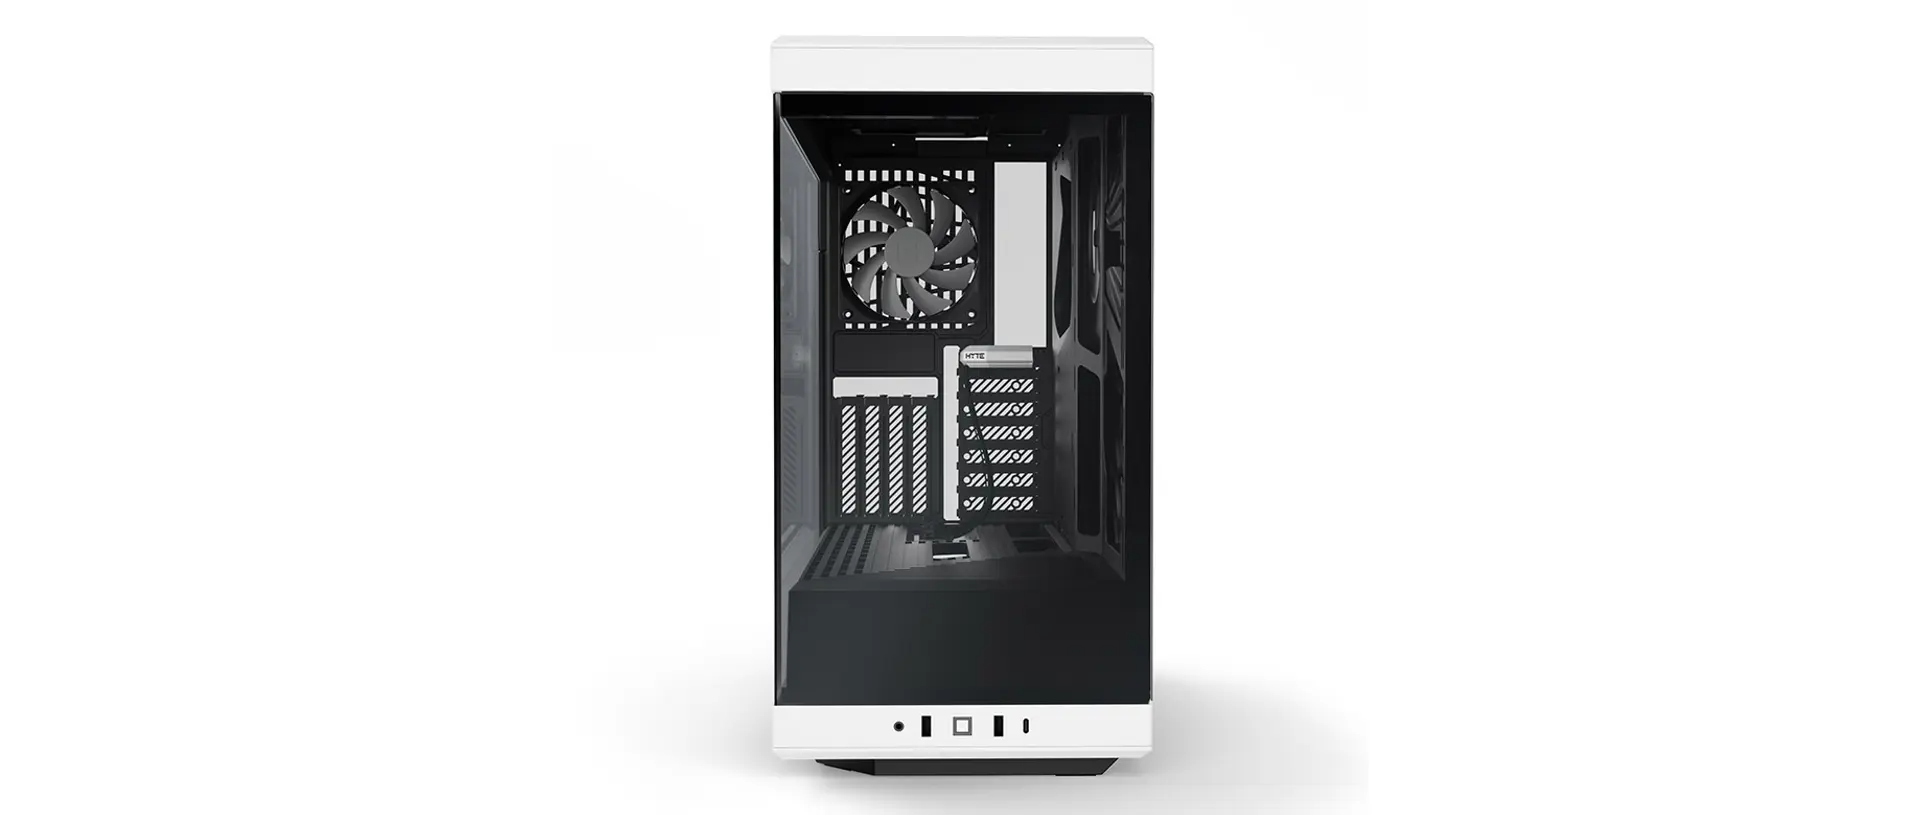 HYTE Y40 Black/White Miditower - Panoramic Glass Veil, included PCIe 4.0 riser cable, 2 included fans HYTE